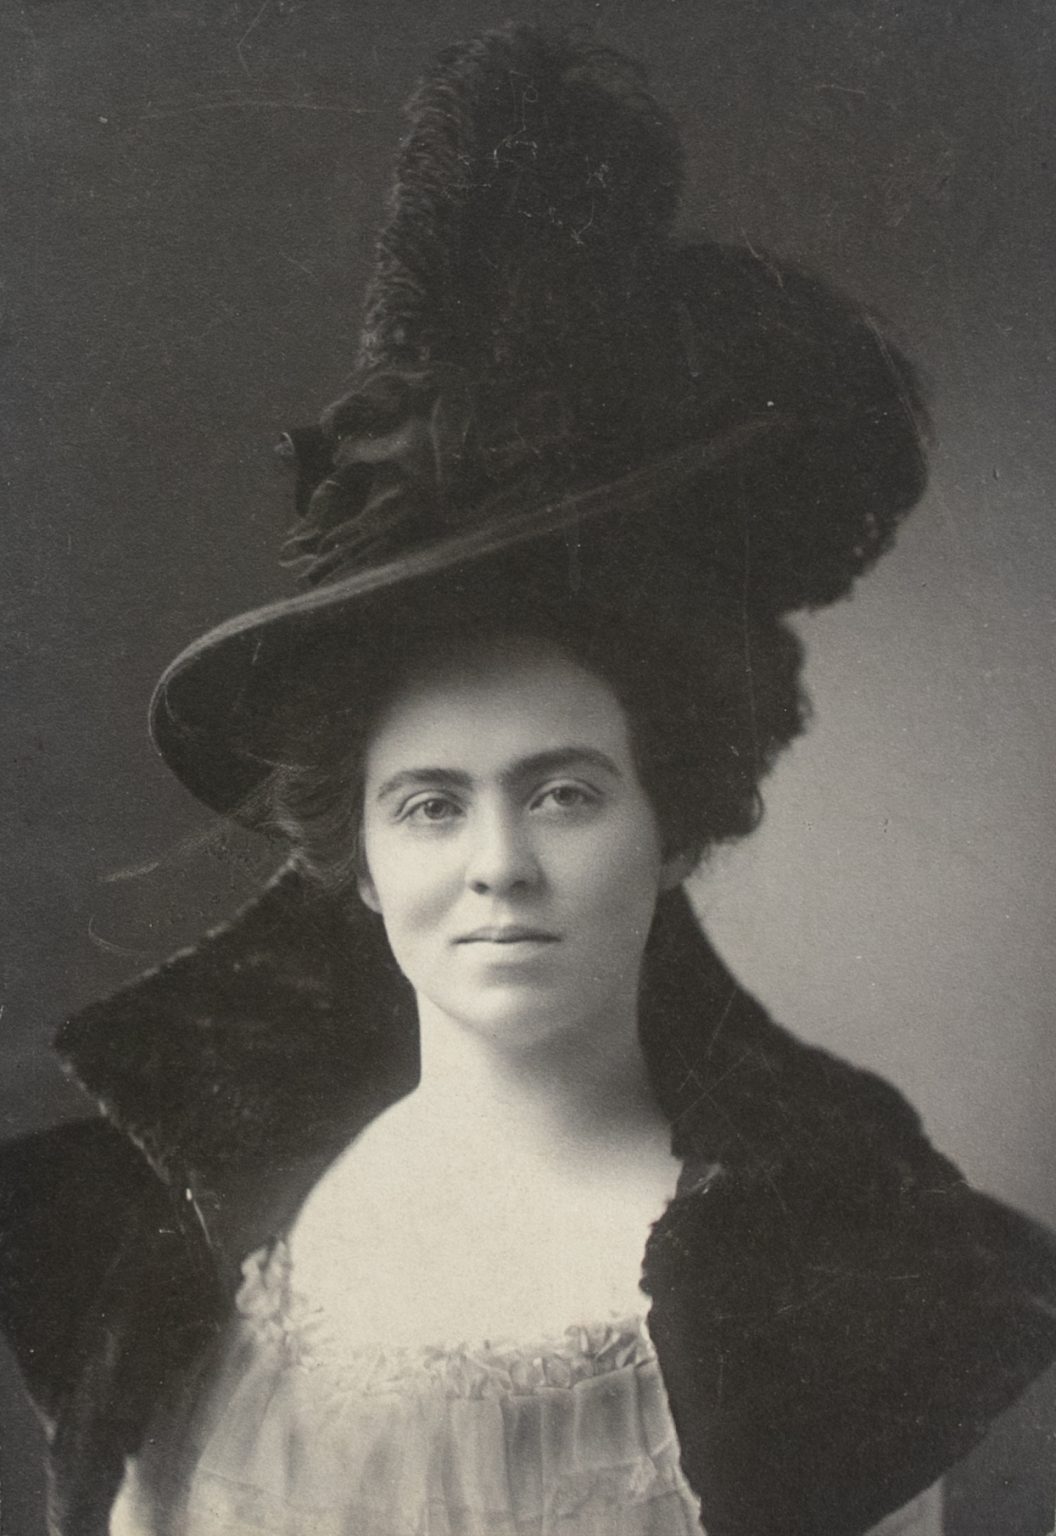 Virginia Dodge wears a feather-topped hat and fur collared-dress and looks at the camera in this black and white portrait.